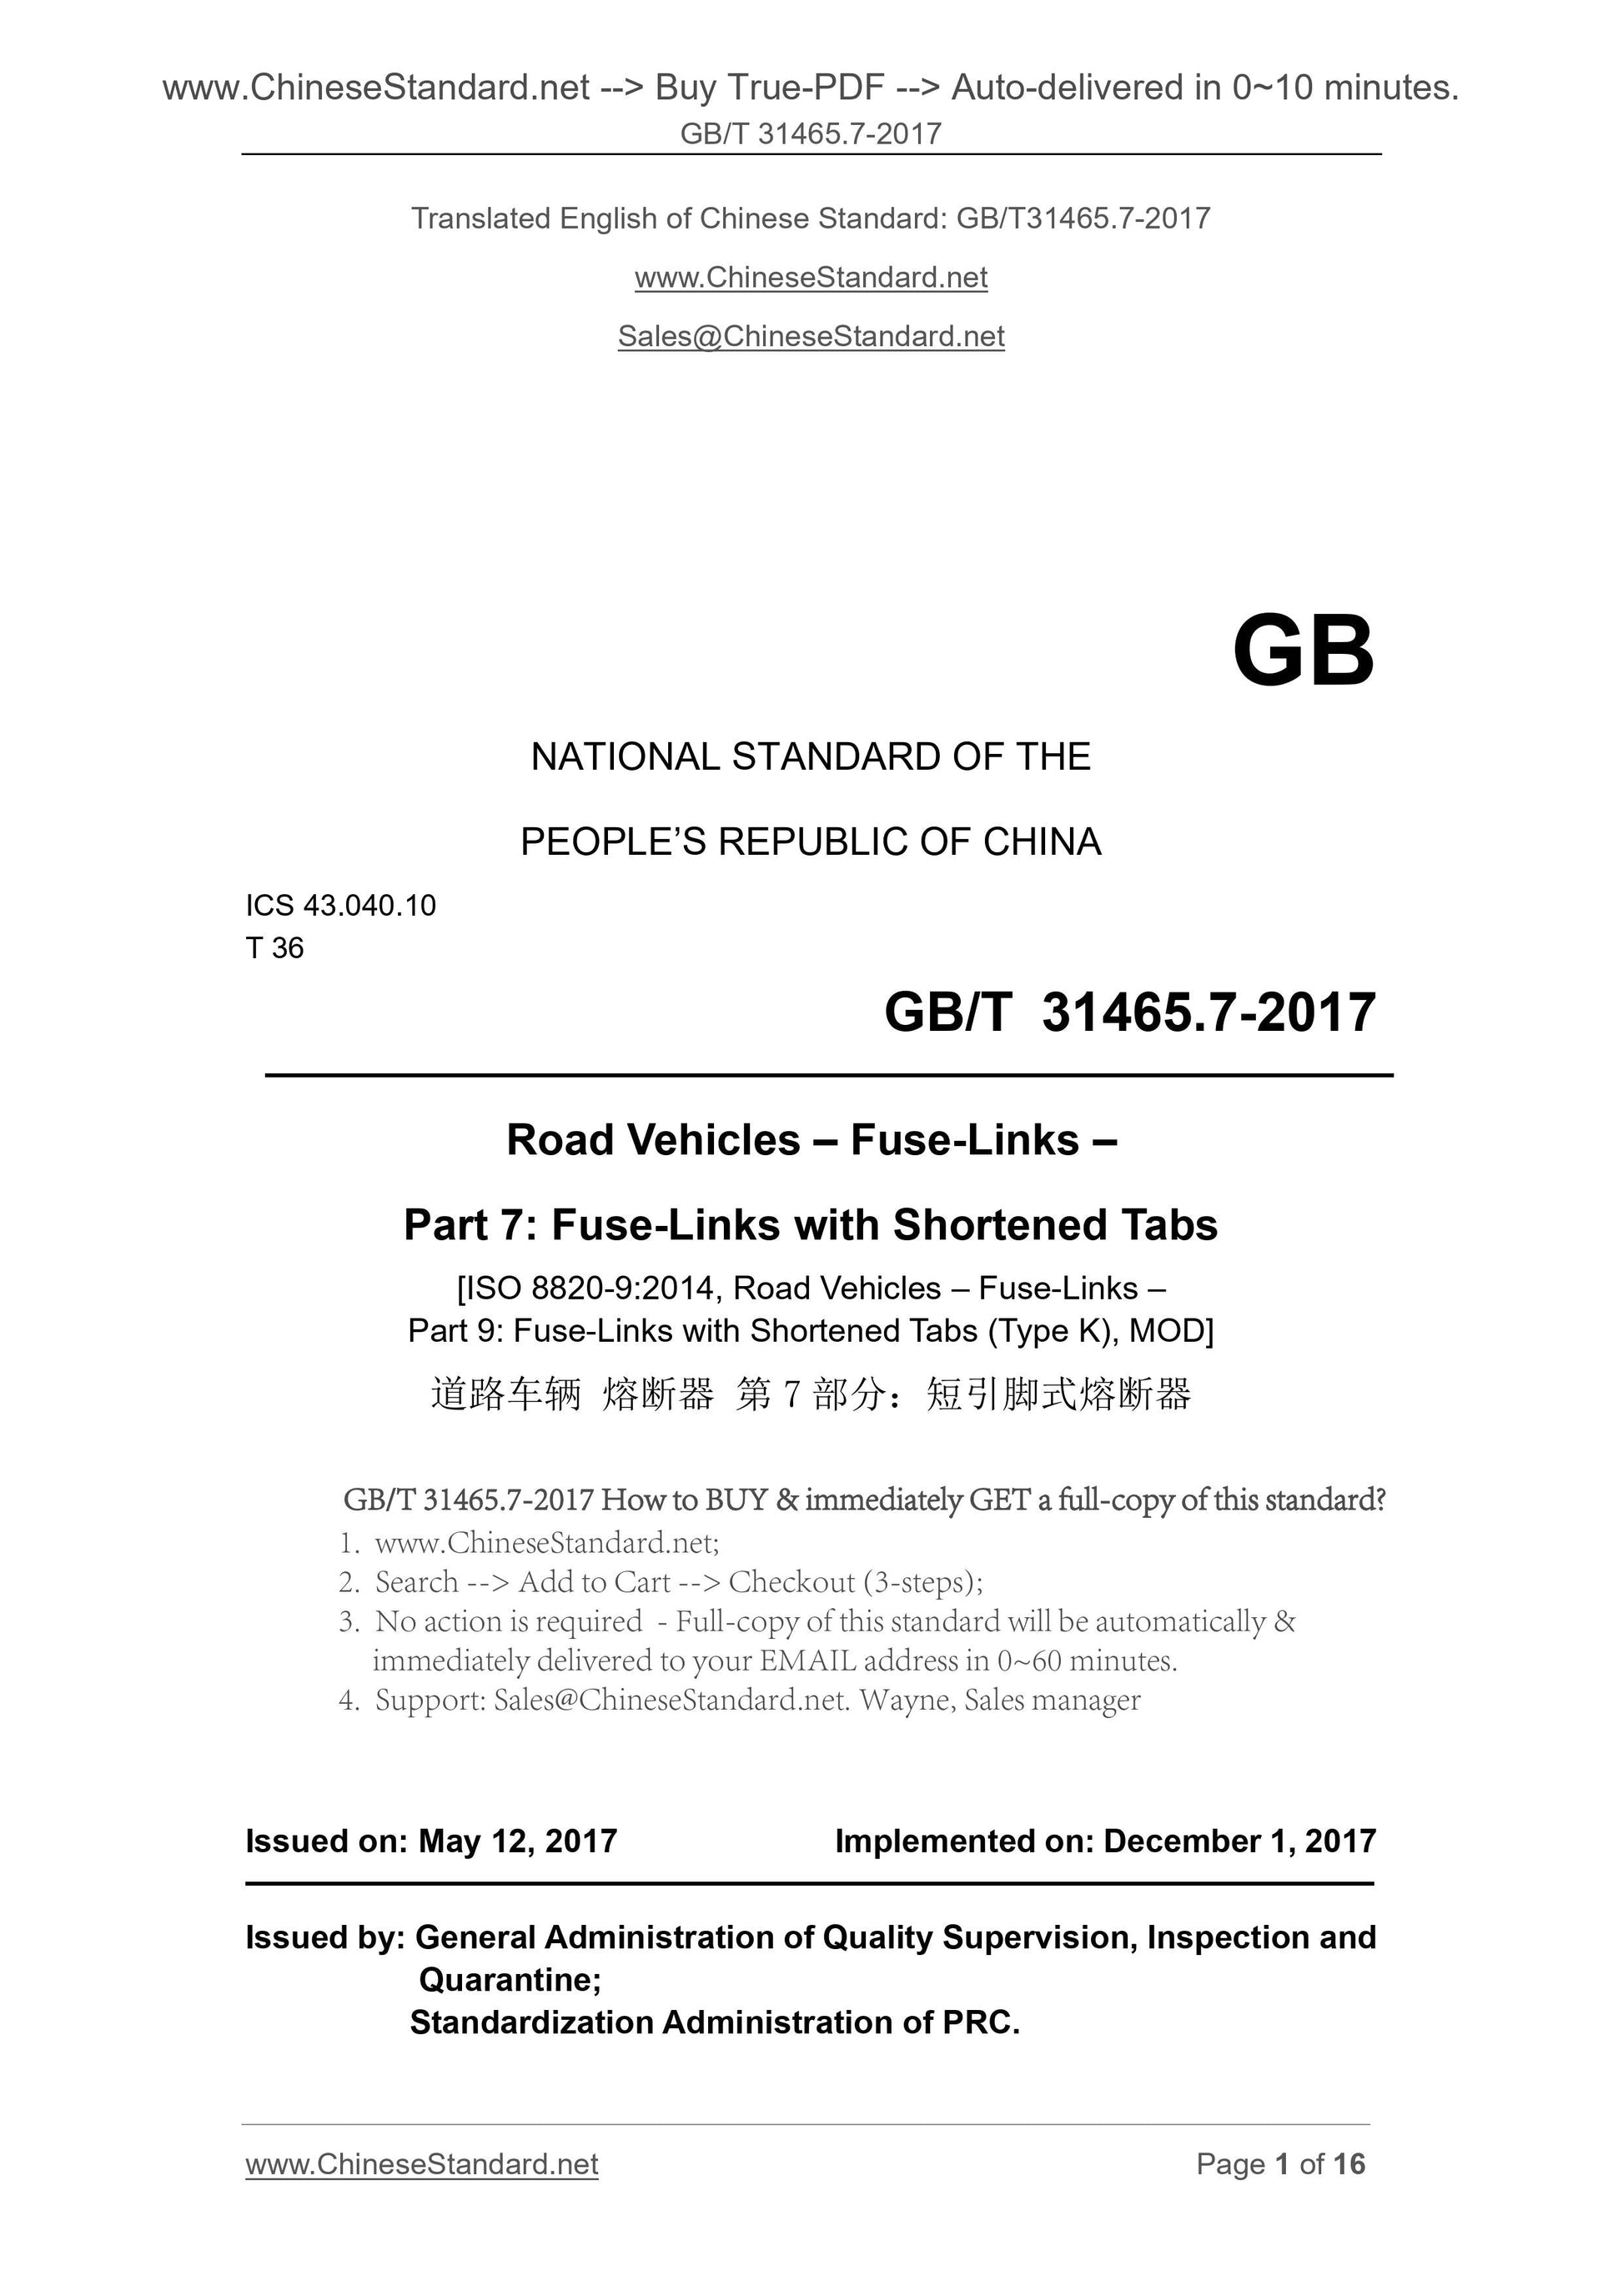 GB/T 31465.7-2017 Page 1